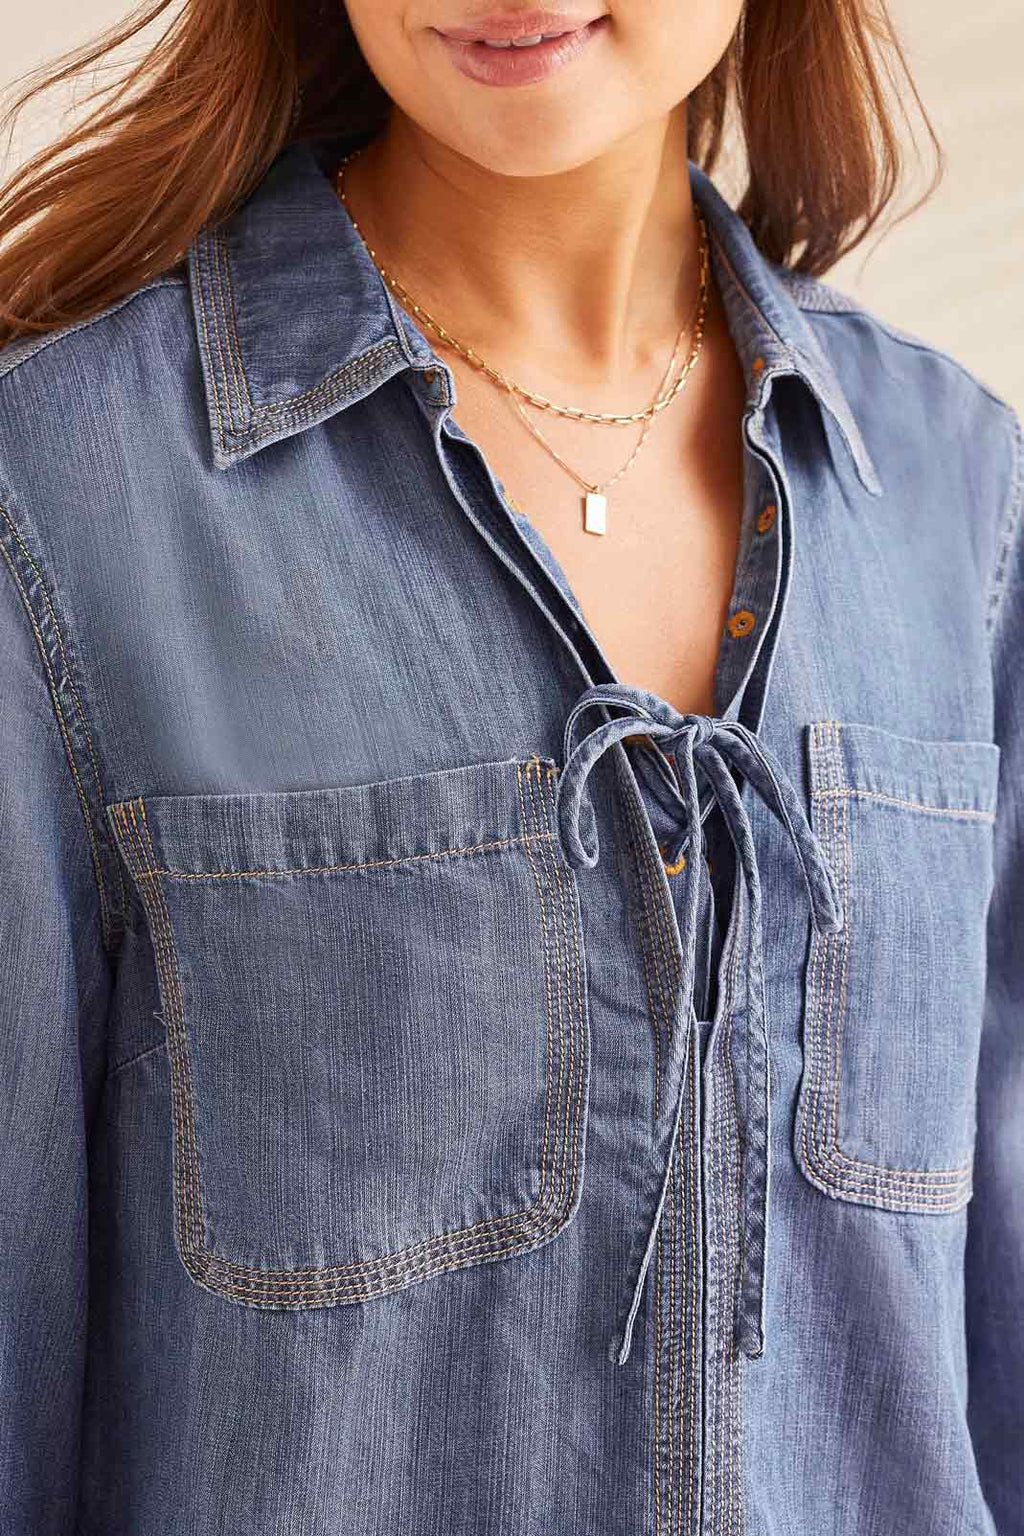 ELBOW SLV POP OVER BLOUSE W/LACE UP-DK. CHAMBRAY-TRIBAL